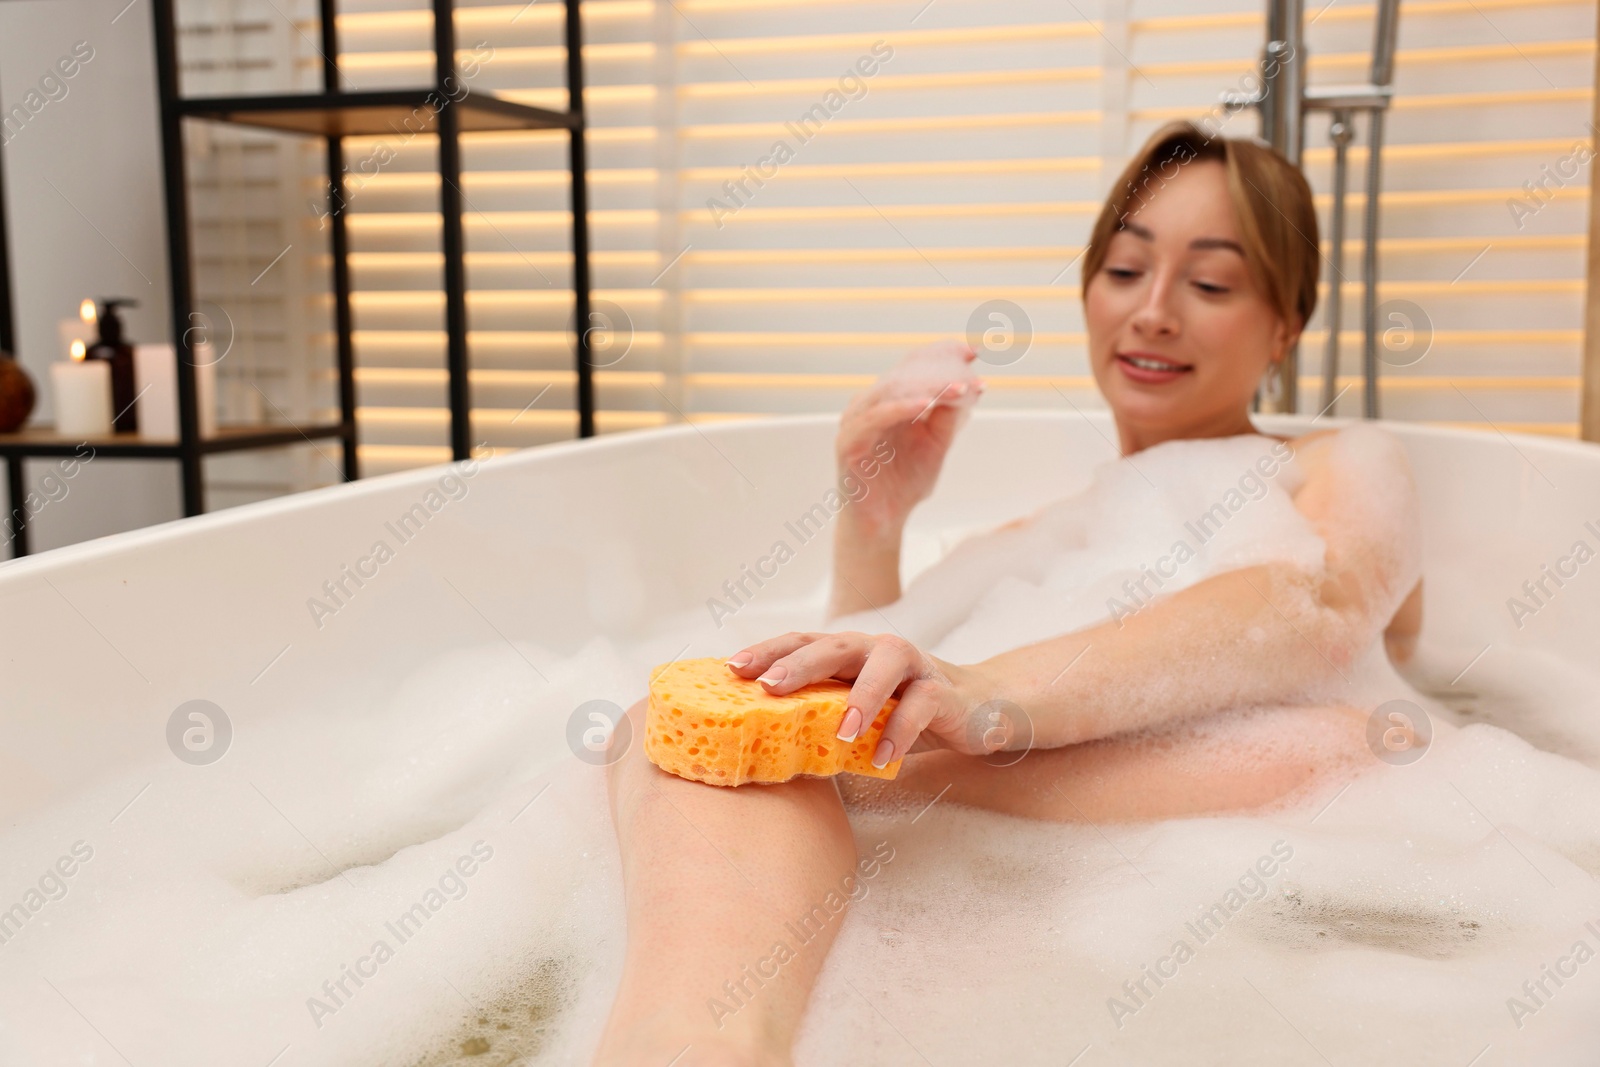 Photo of Happy woman taking bath with foam in tub indoors, selective focus